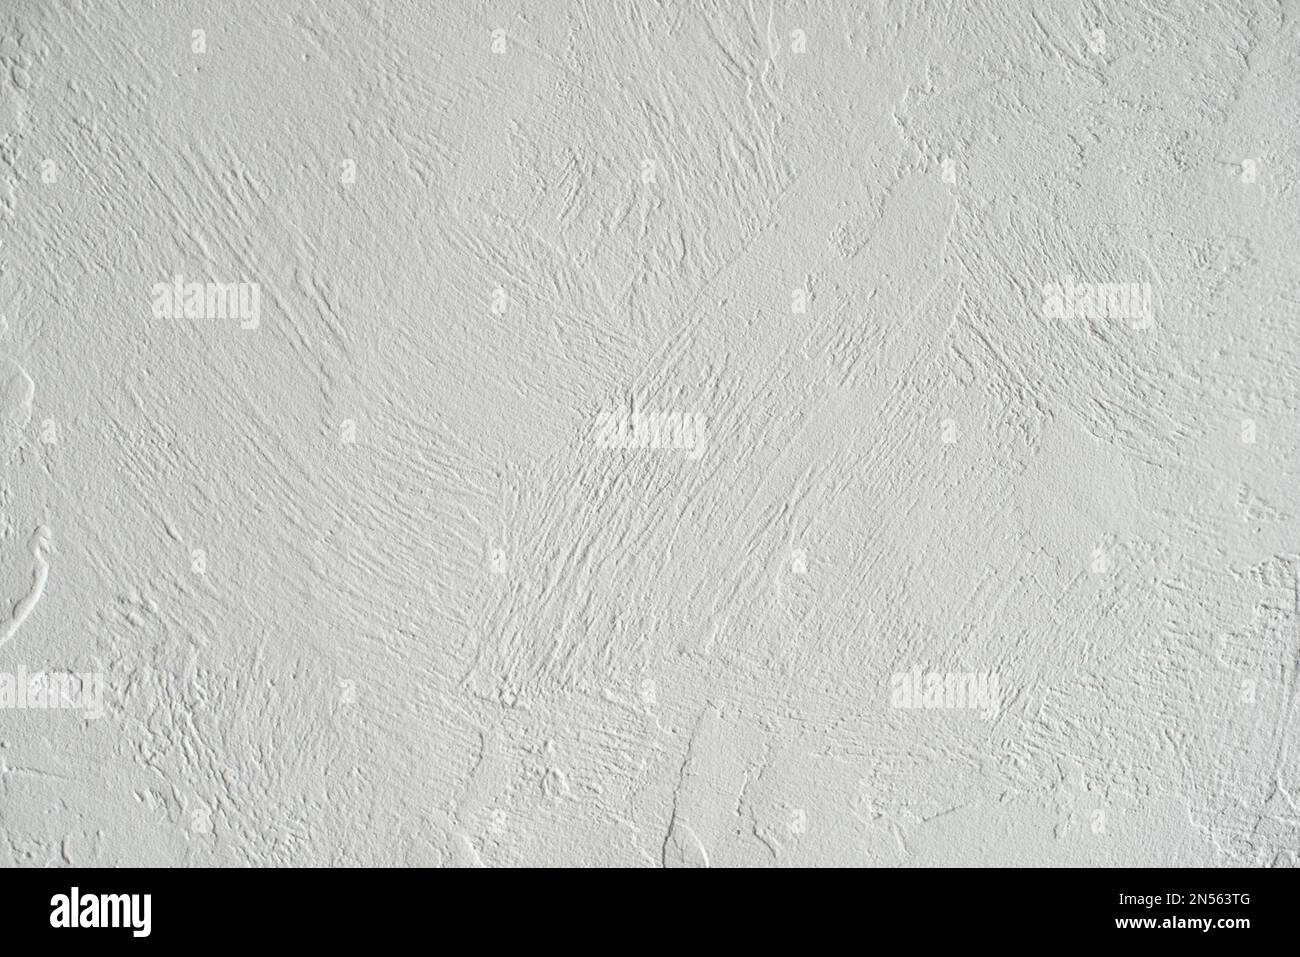 Natural white stucco wall surface Stock Photo